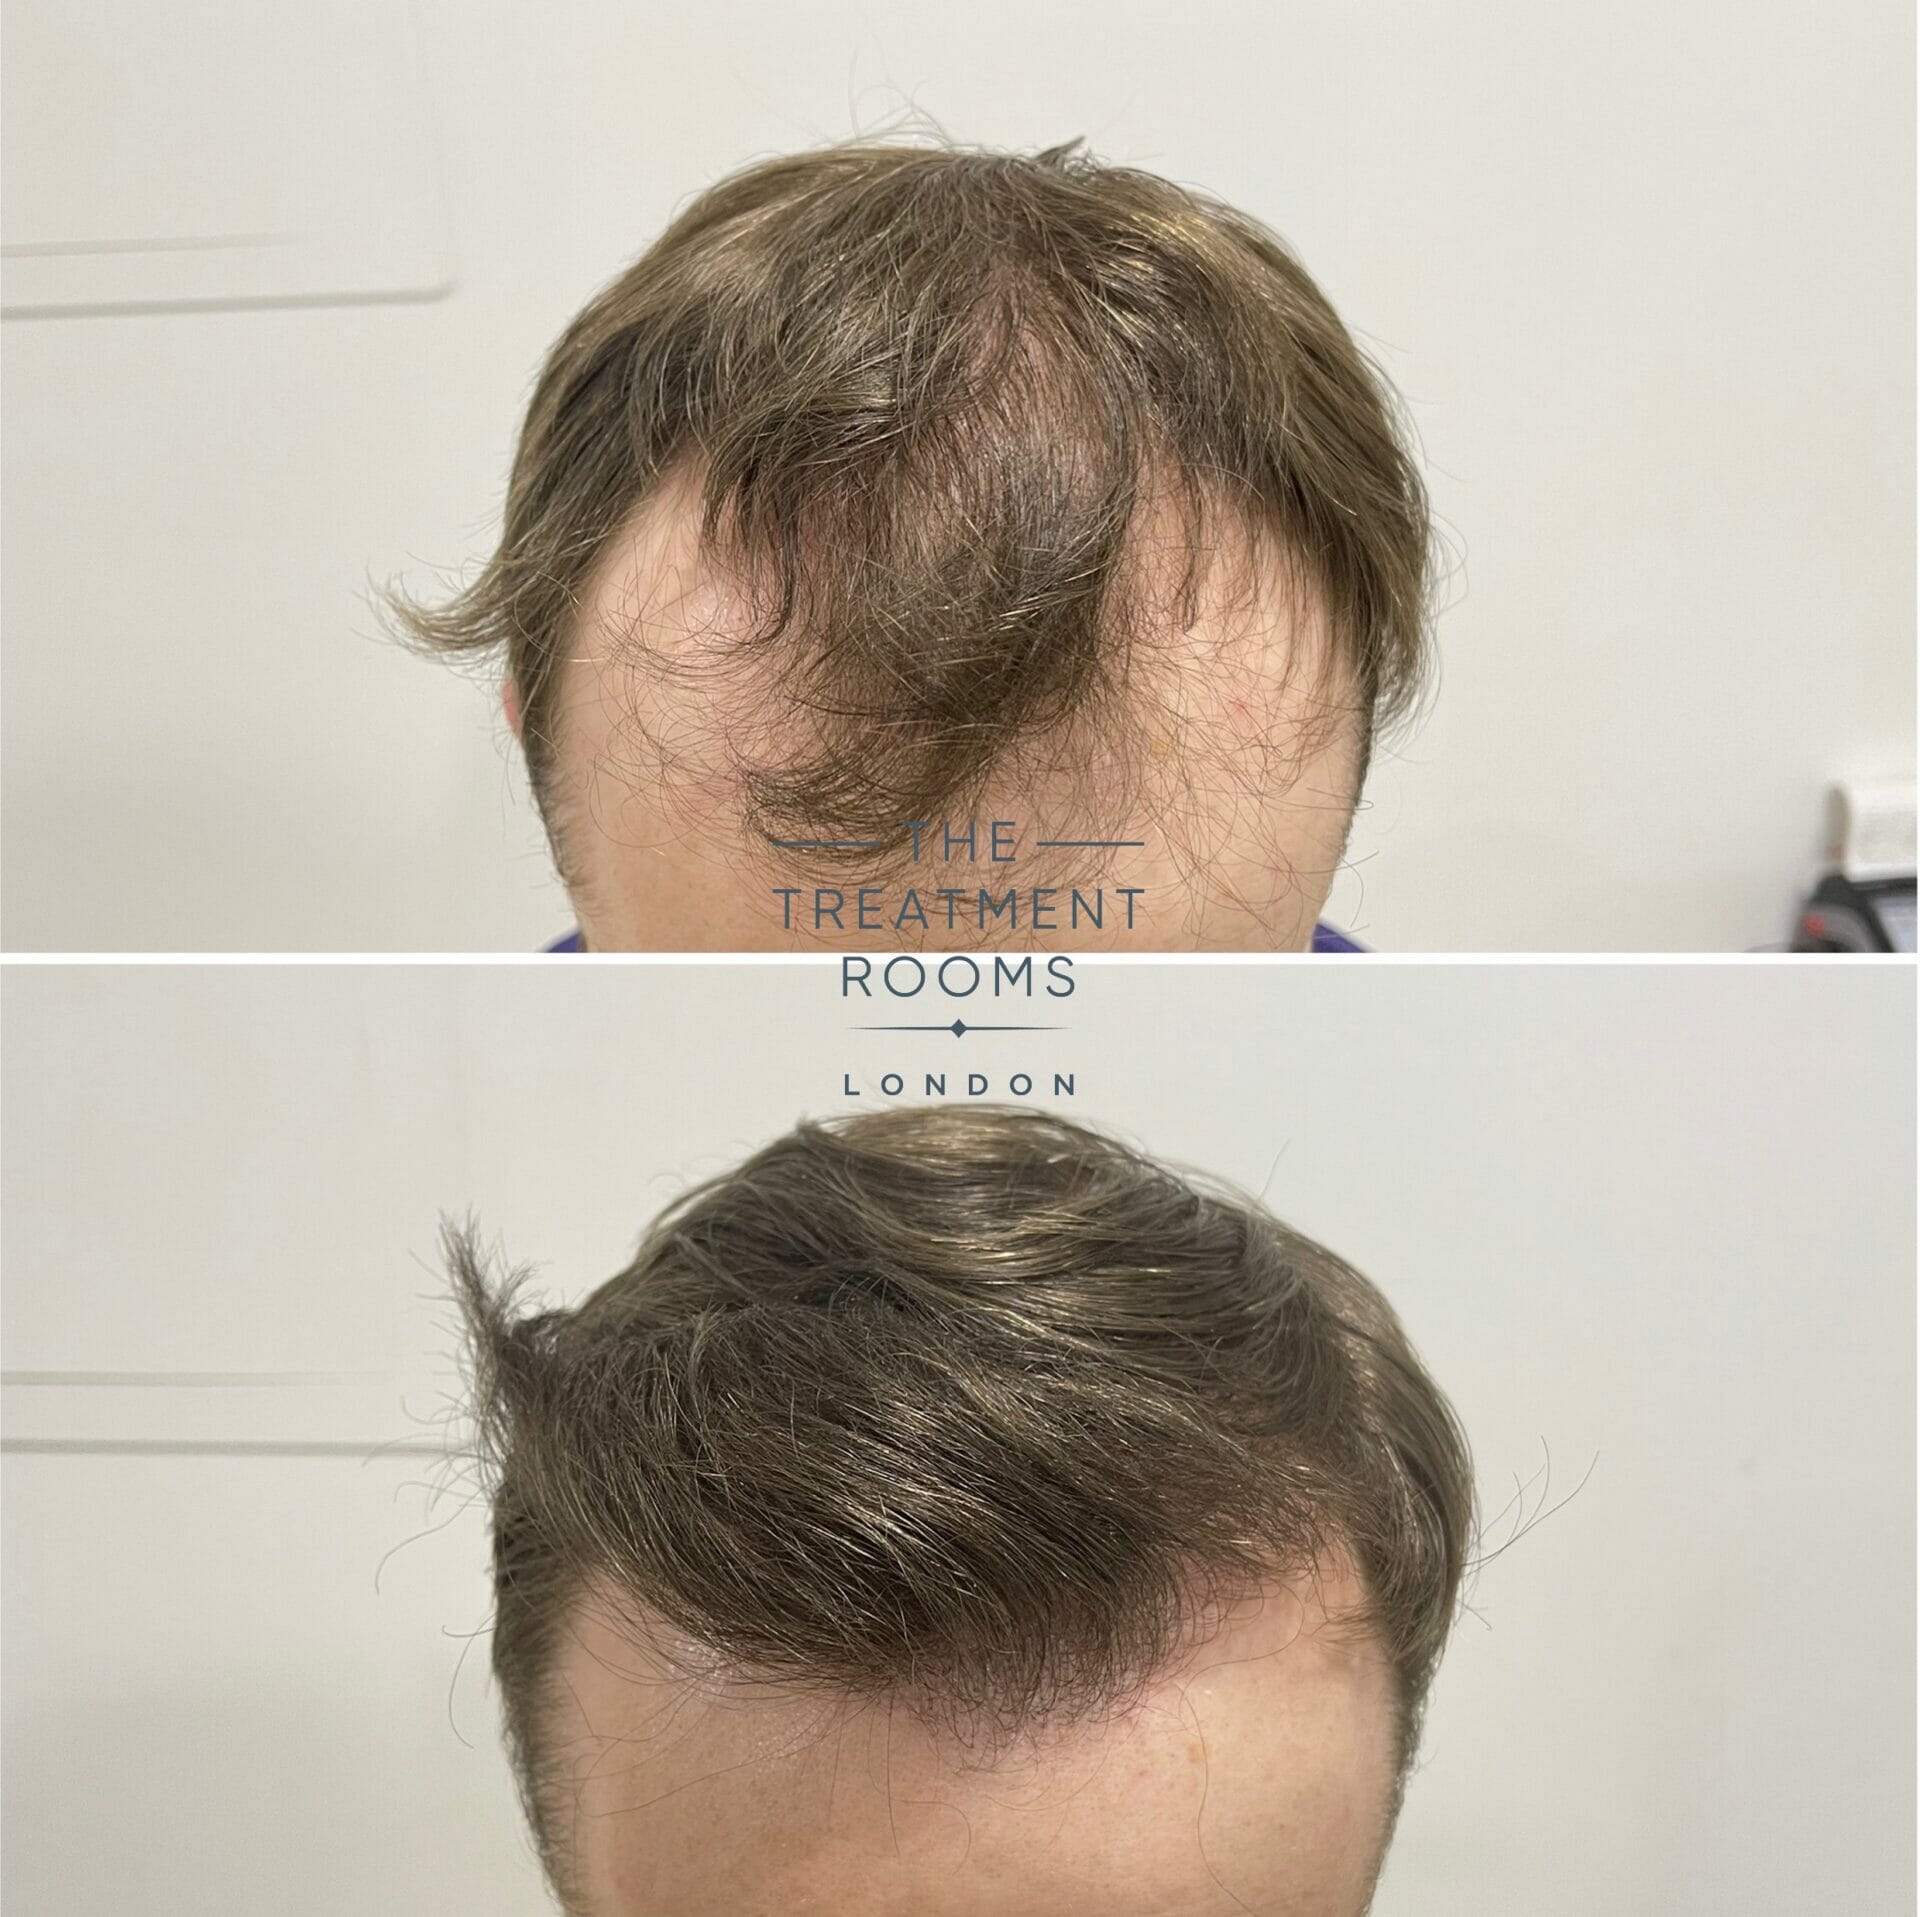 Hairline hair transplant review